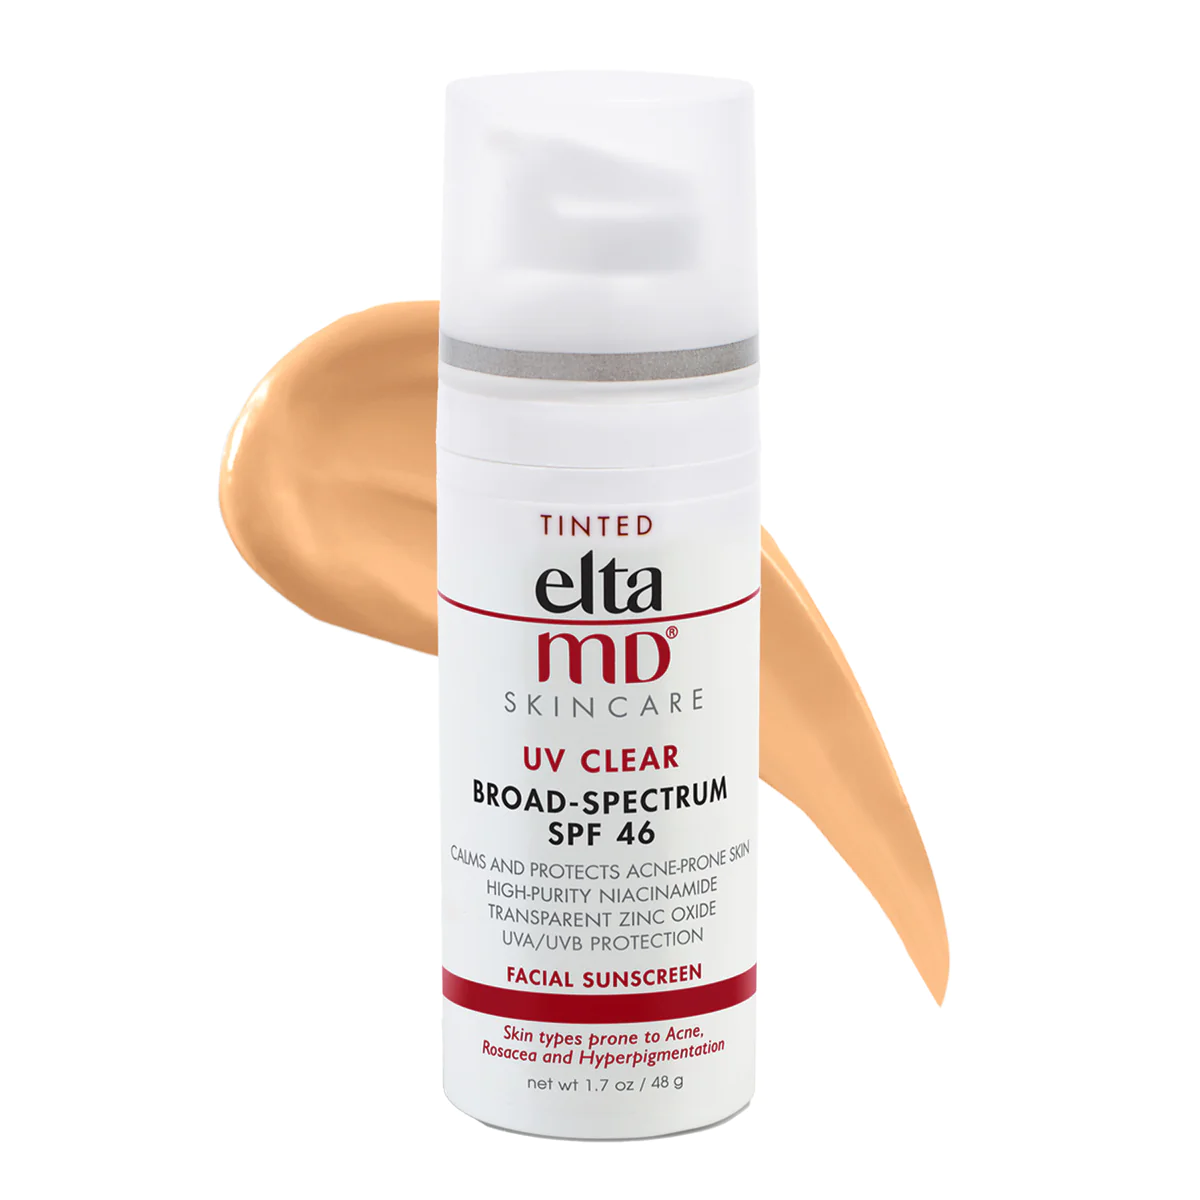 FEMMENORDIC's choice in the Elta MD Tinted vs Clear sunscreen comparison, the Elta MD UV Clear Tinted Facial Sunscreen